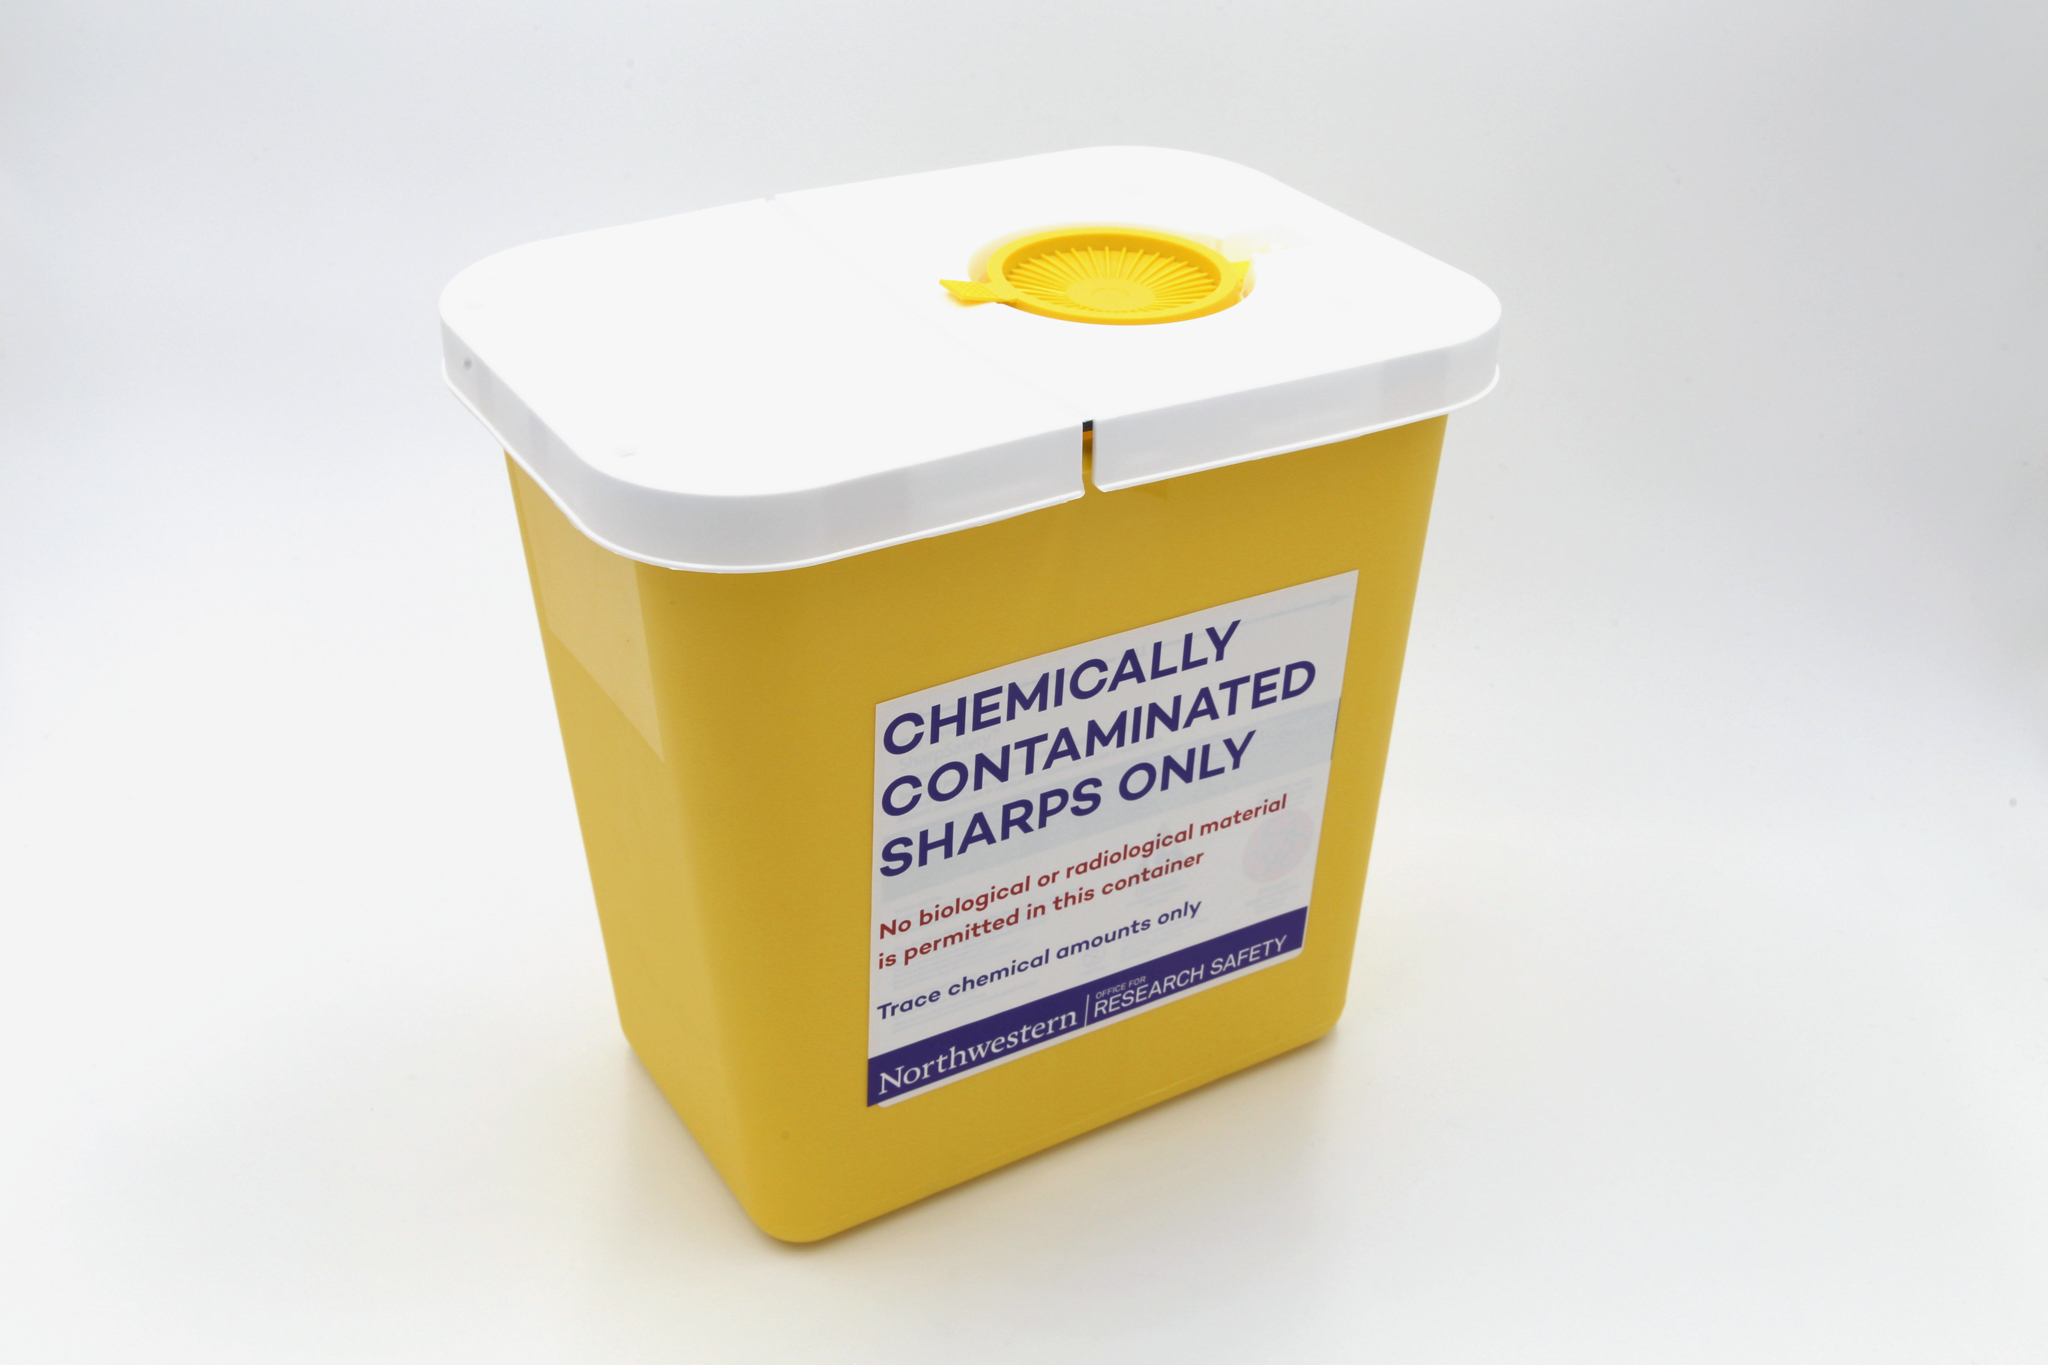 yellow plastic chemically contaminated sharps container on white background